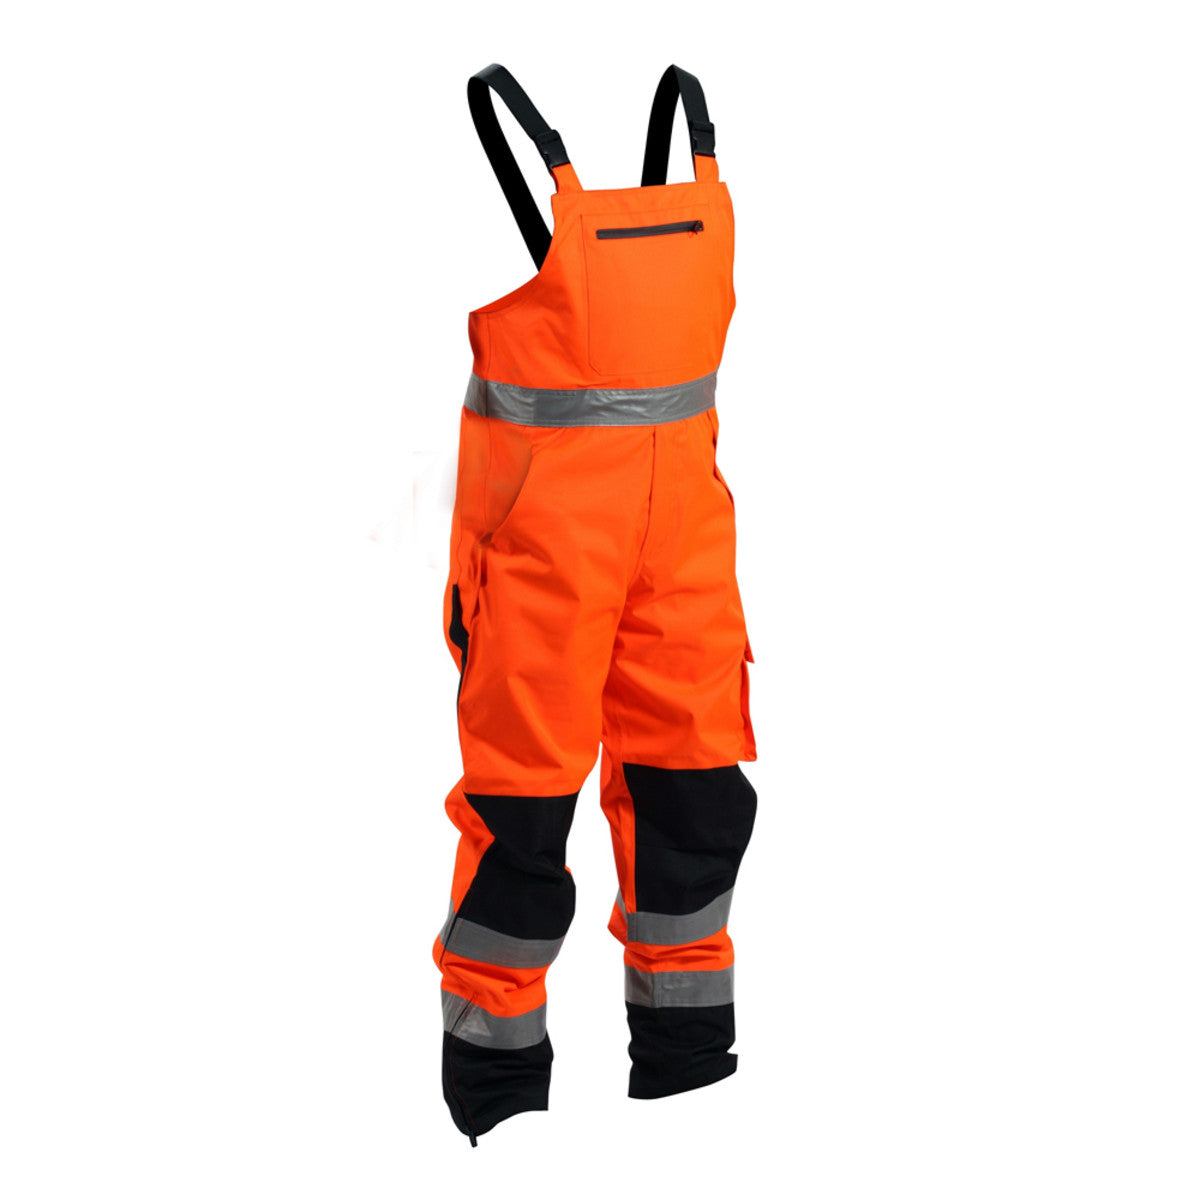 Bison Extreme Taped Bib Overall